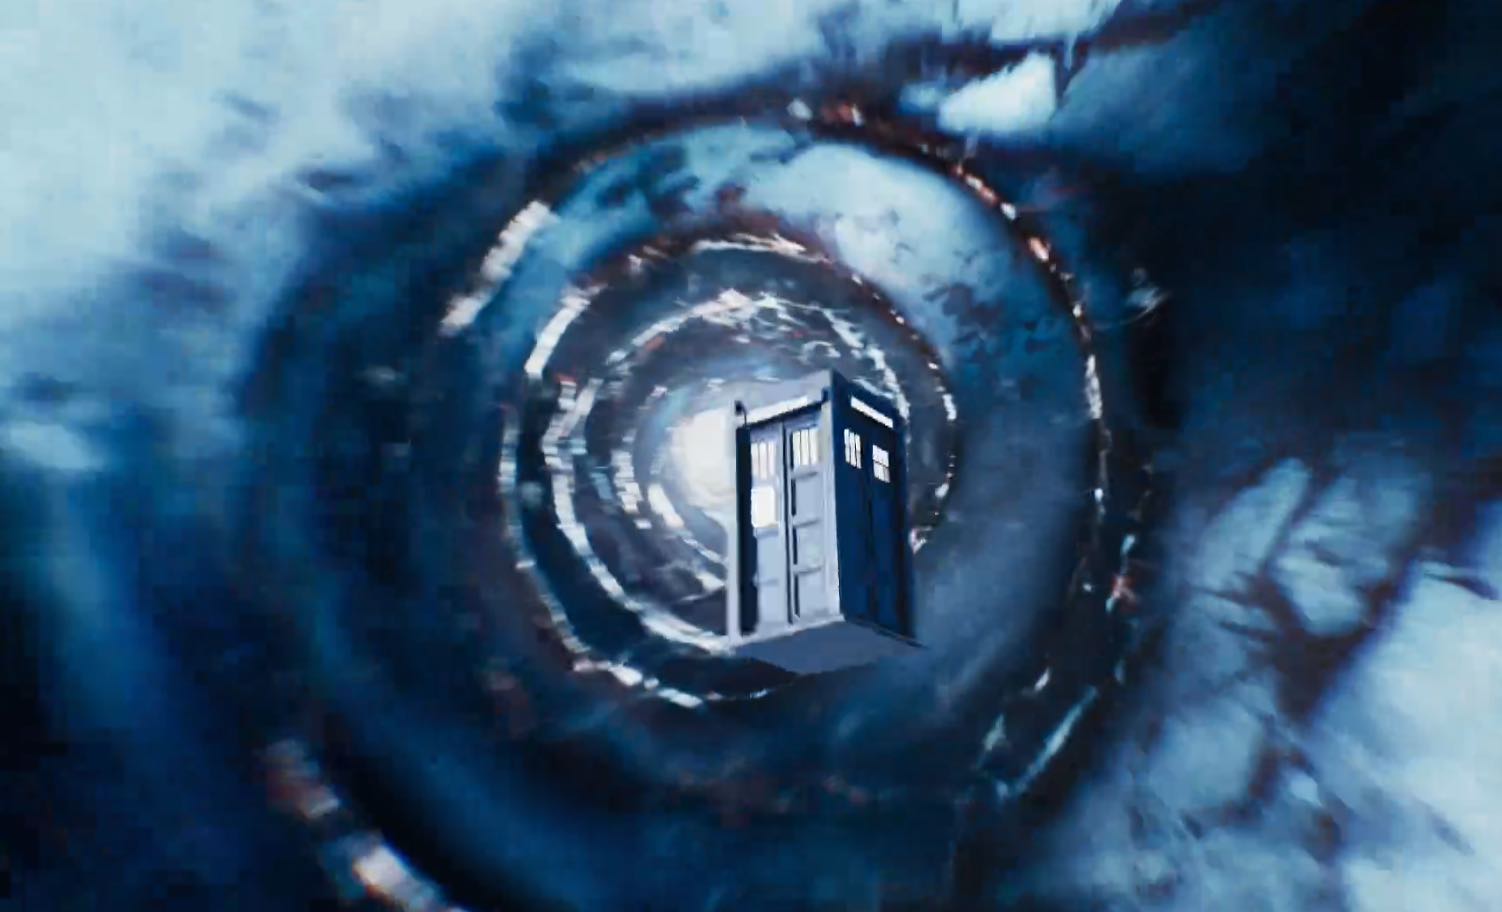 The First Doctor's TARDIS in flight. (TV: Twice Upon a Time [+]Loading...["Twice Upon a Time (TV story)"])